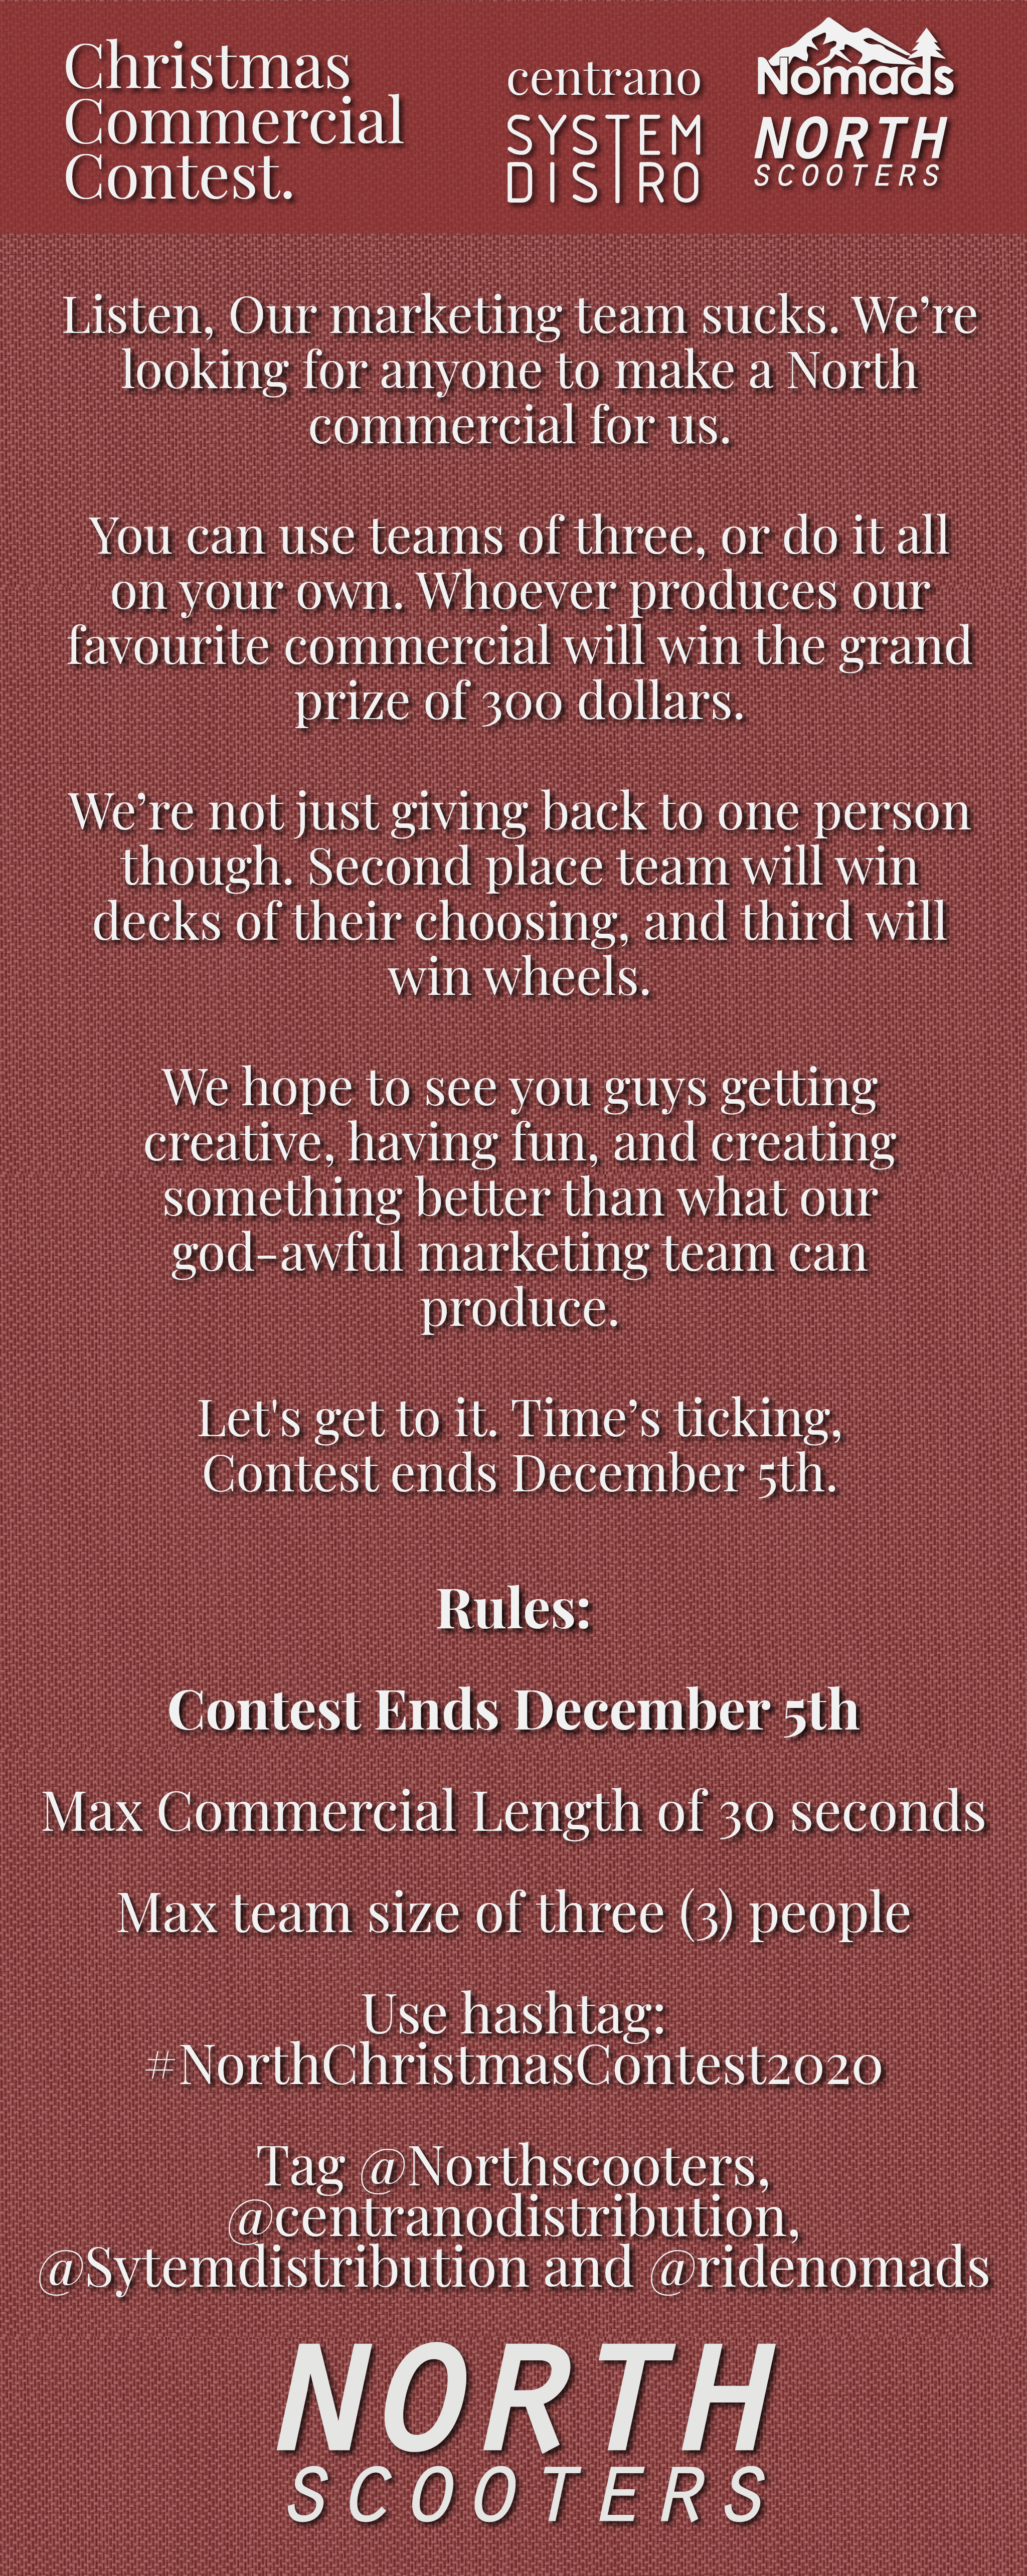 Listen, Our marketing team sucks. We’re looking for anyone to make a North commercial for us.   You can use teams of three, or do it all on your own. Whoever produces our  favourite commercial will win the grand prize of 300 dollars.   We’re not just giving back to one person though. Second place team will win decks of their choosing, and third will win wheels.   We hope to see you guys getting  creative, having fun, and creating  something better than what our god-awful marketing team can  produce.   Let's get to it. Time’s ticking,   Contest ends December 5th. Rules:  Contest Ends December 5th  Max Commercial Length of 30 seconds  Max team size of three (3) people  Use hashtag: #NorthChristmasContest2020  Tag @Northscooters,  @centranodistribution,  @Sytemdistribution and @ridenomads